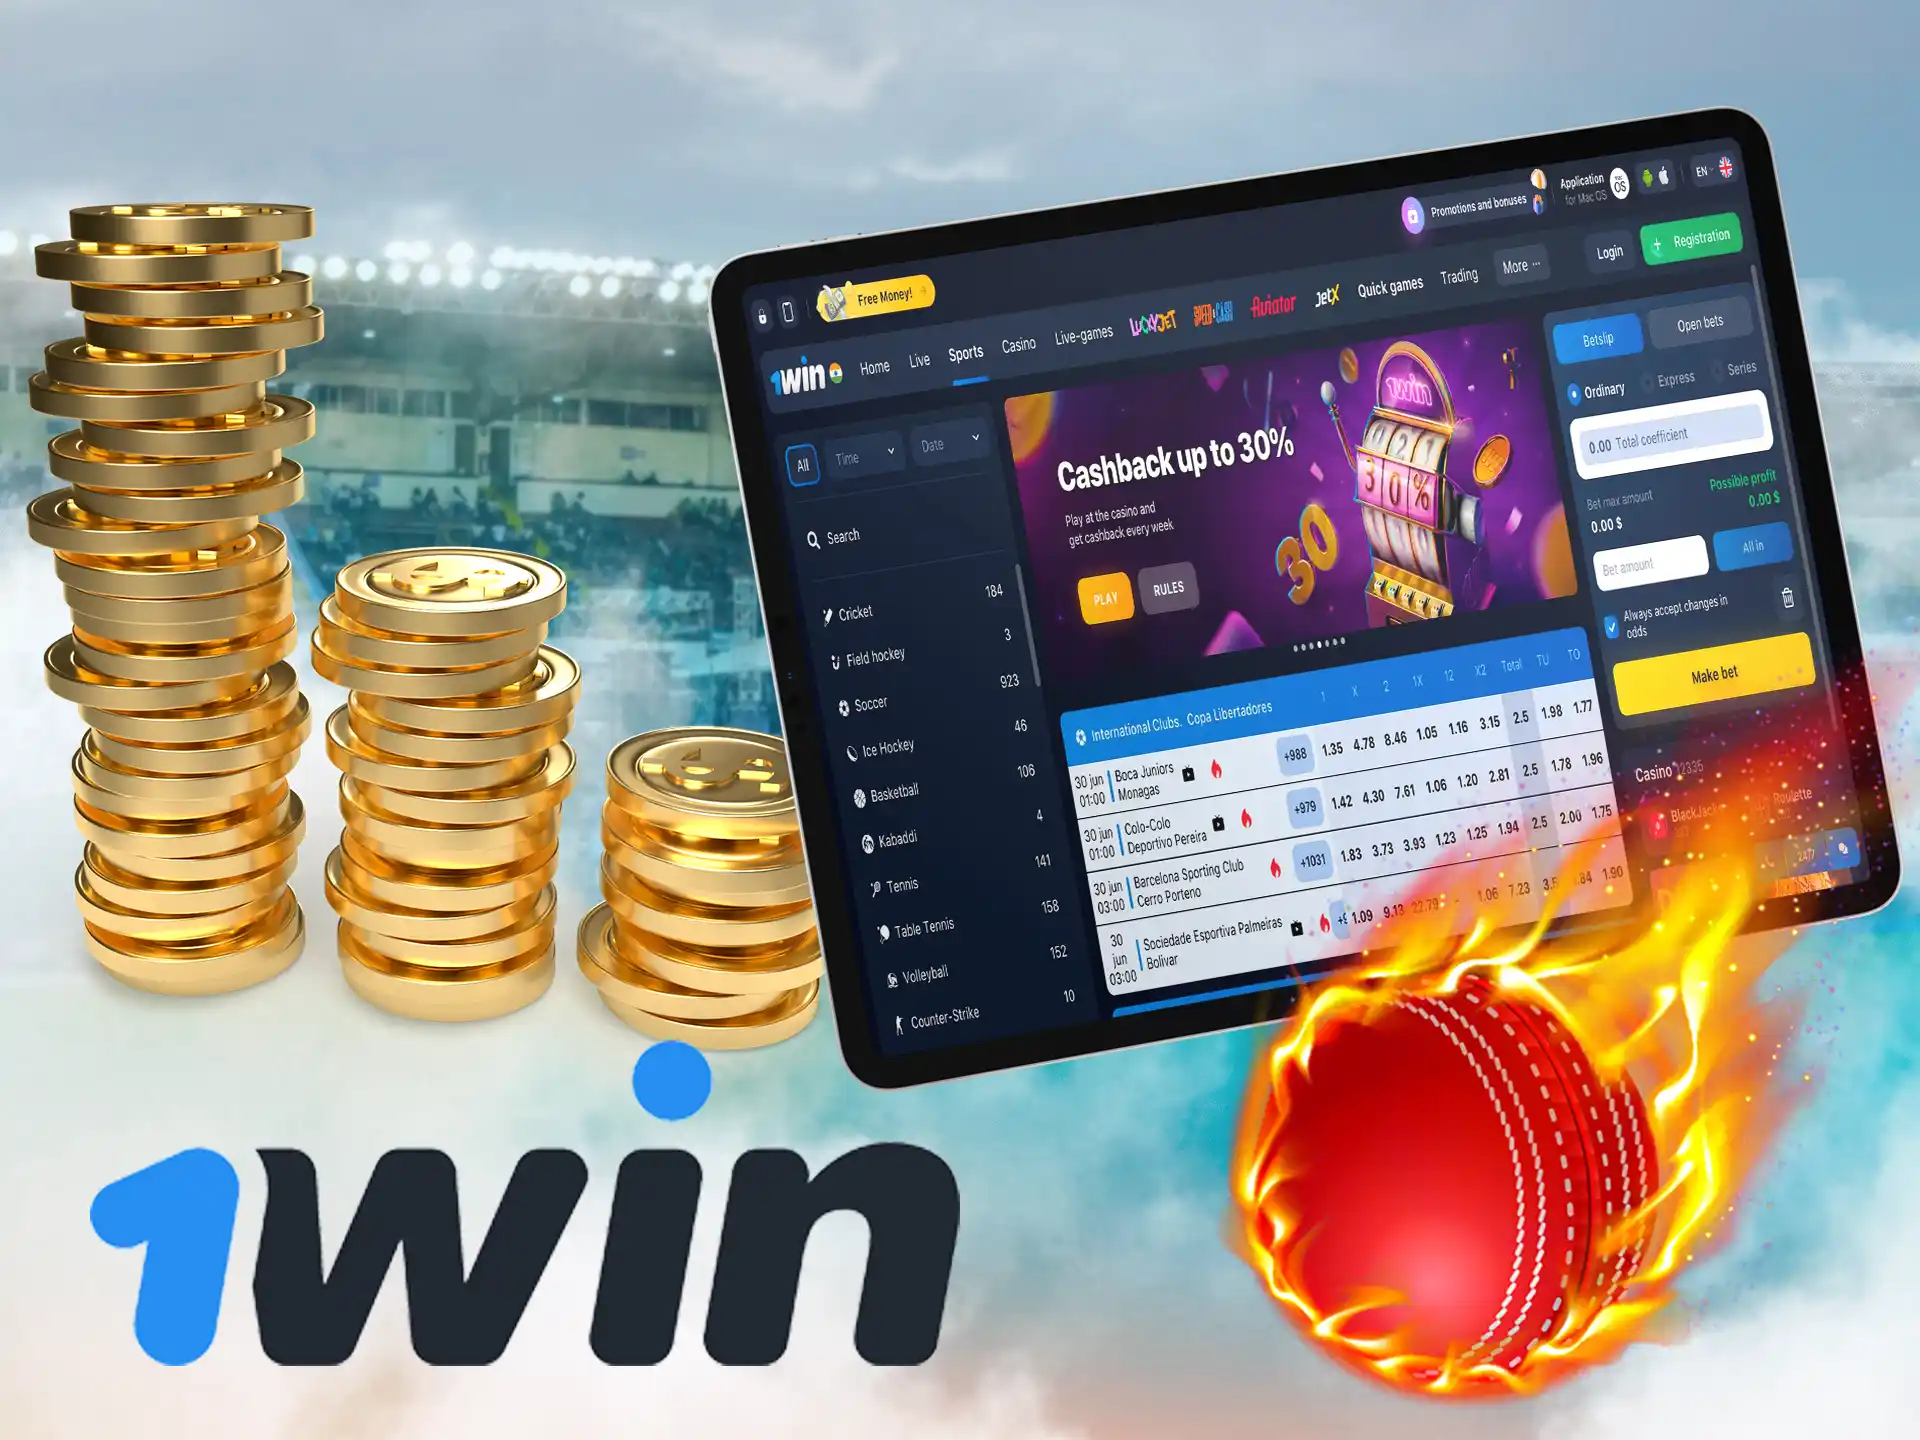 If you're looking for a place where you can earn real money by betting quickly to withdraw it into your account - 1Win is your choice.